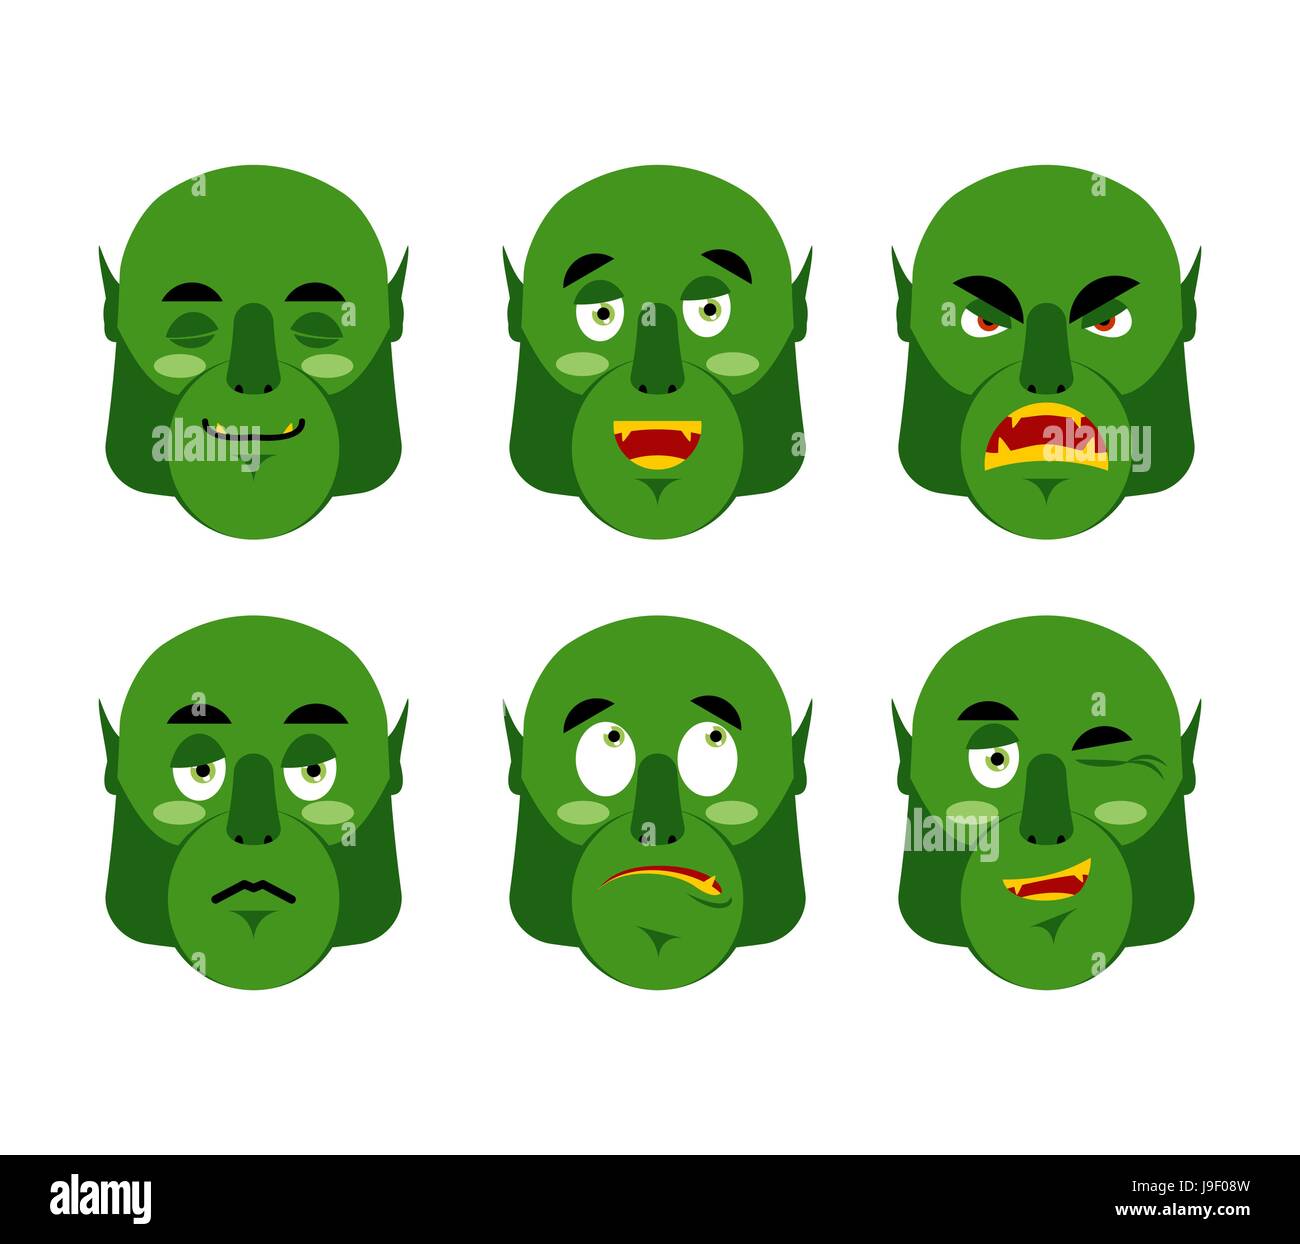 Emotions ogre. Set emoji expressions avatar green monster. Good and evil goblin. Discouraged and cheerful. Sad and sleepy. Aggressive and cute Stock Vector